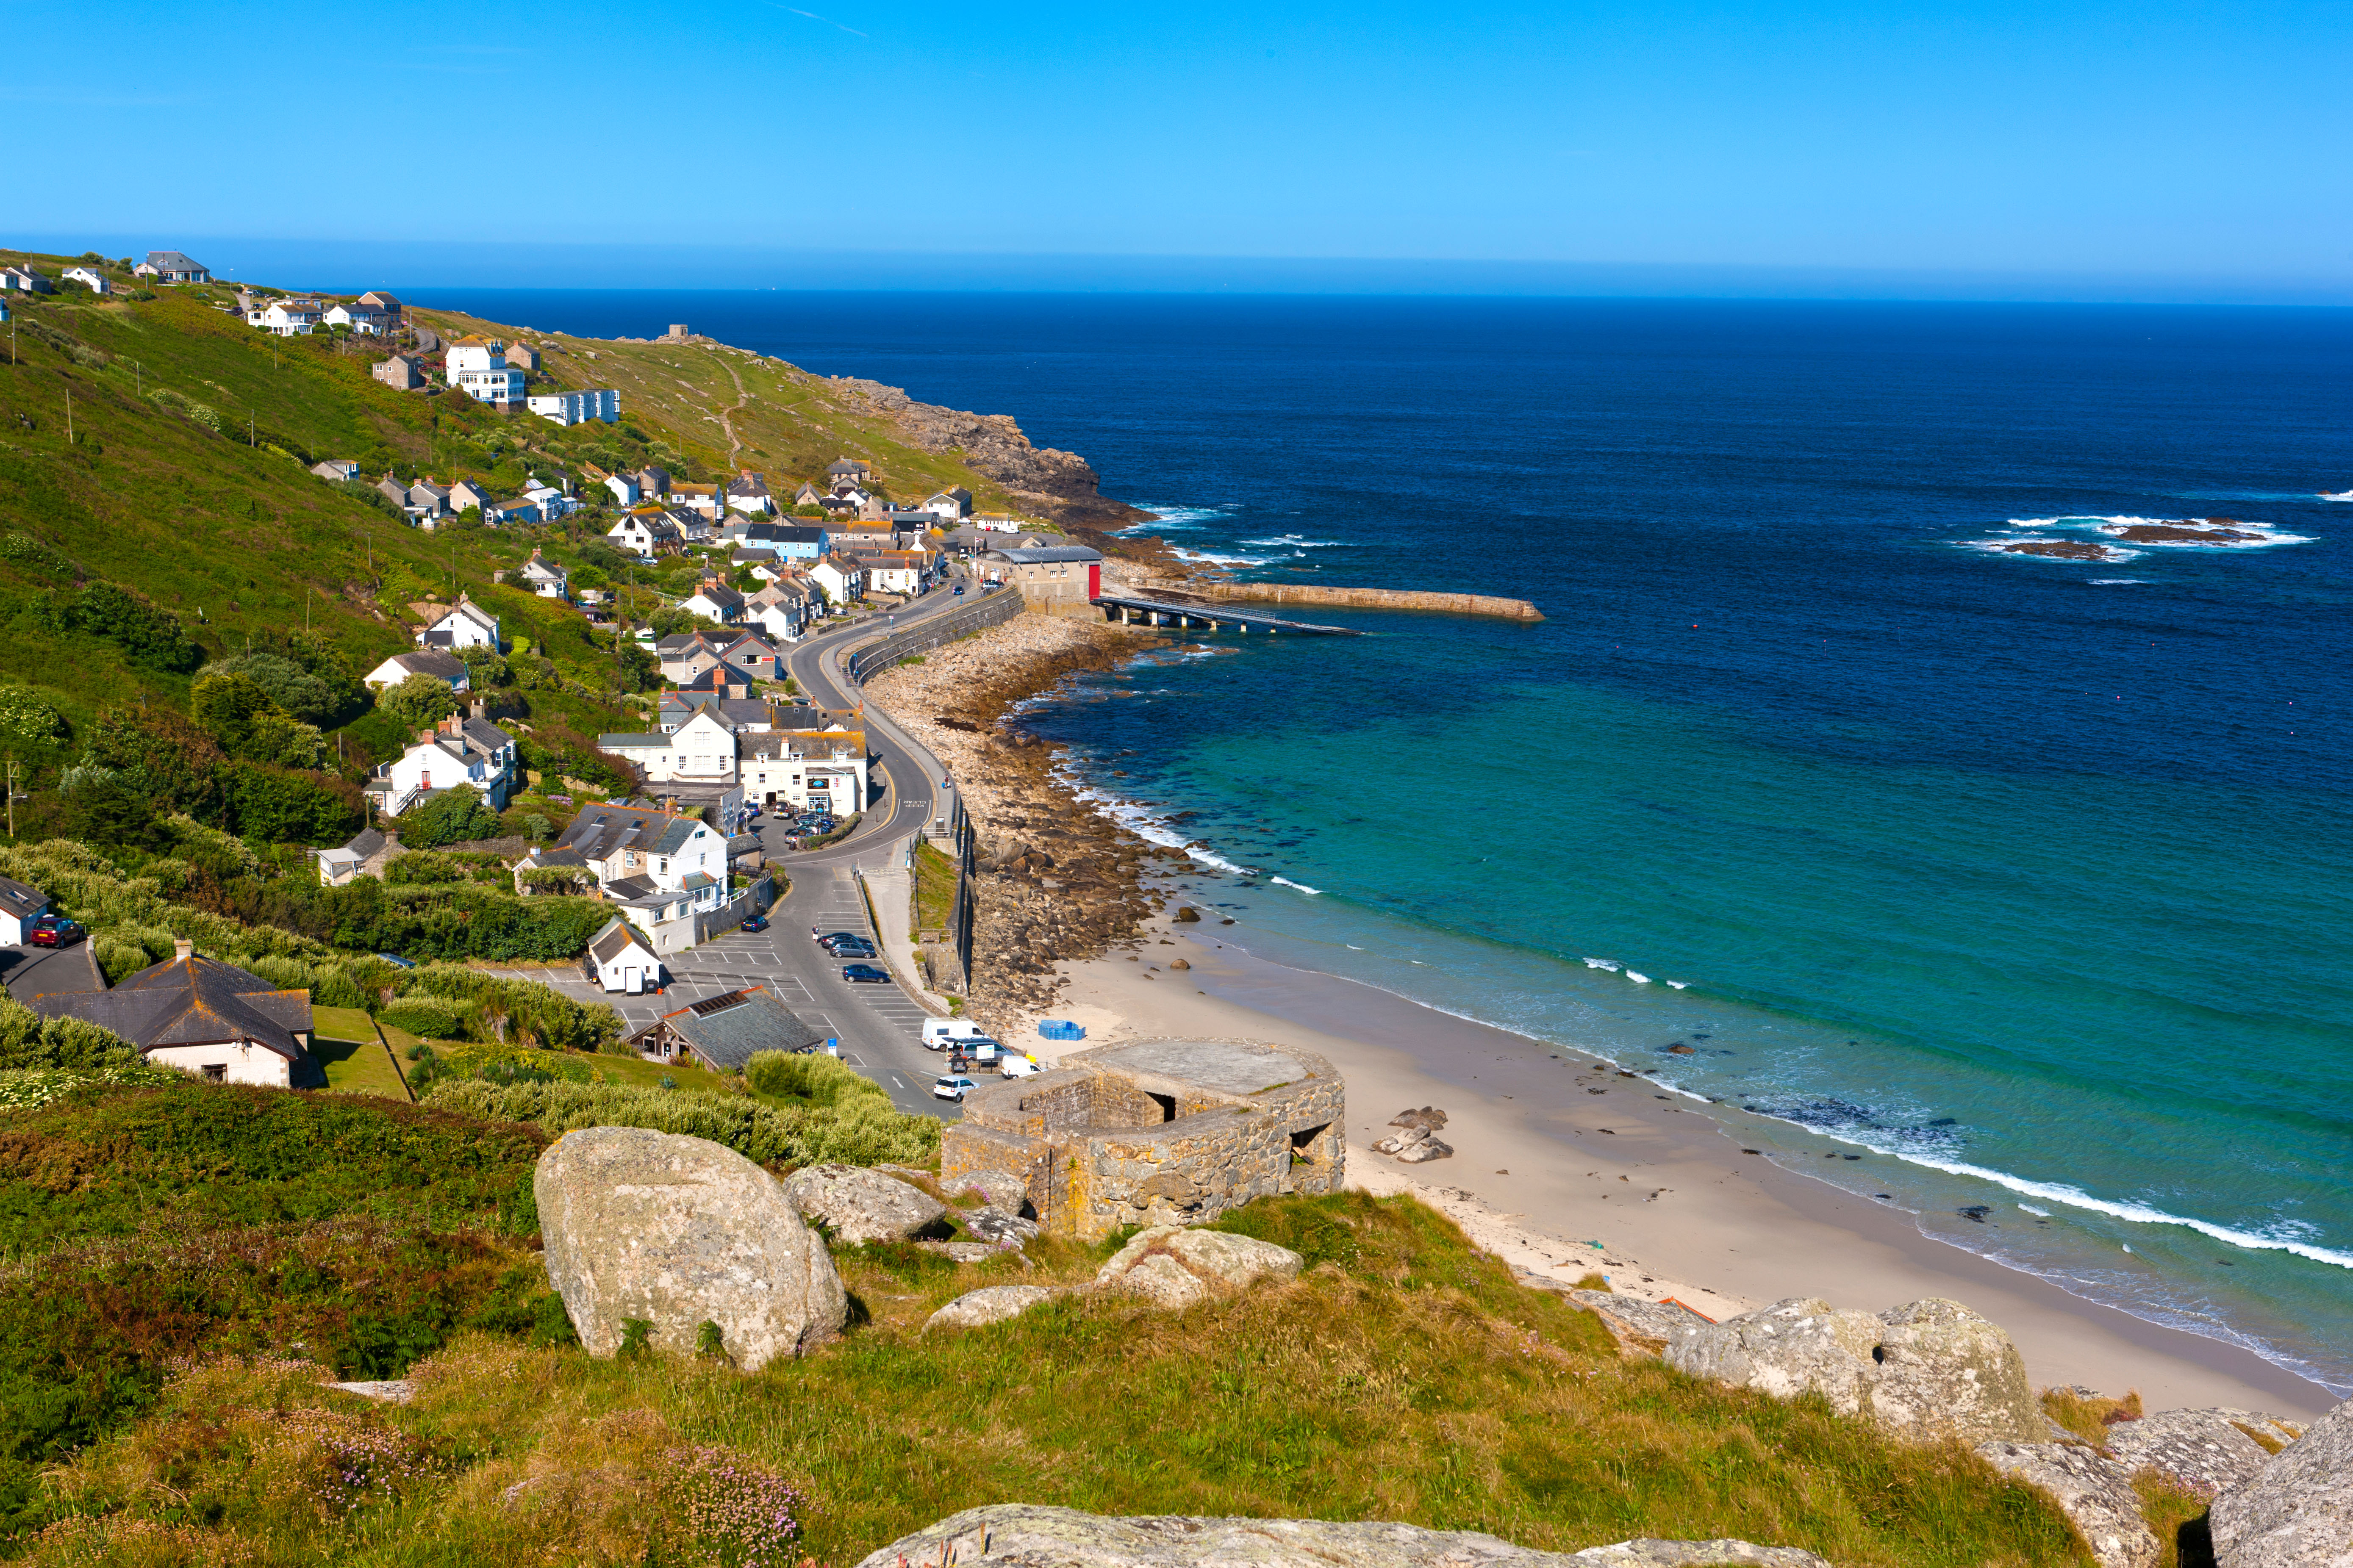 Sennen Cove is home to thatched cottages, many of which overlook the harbour